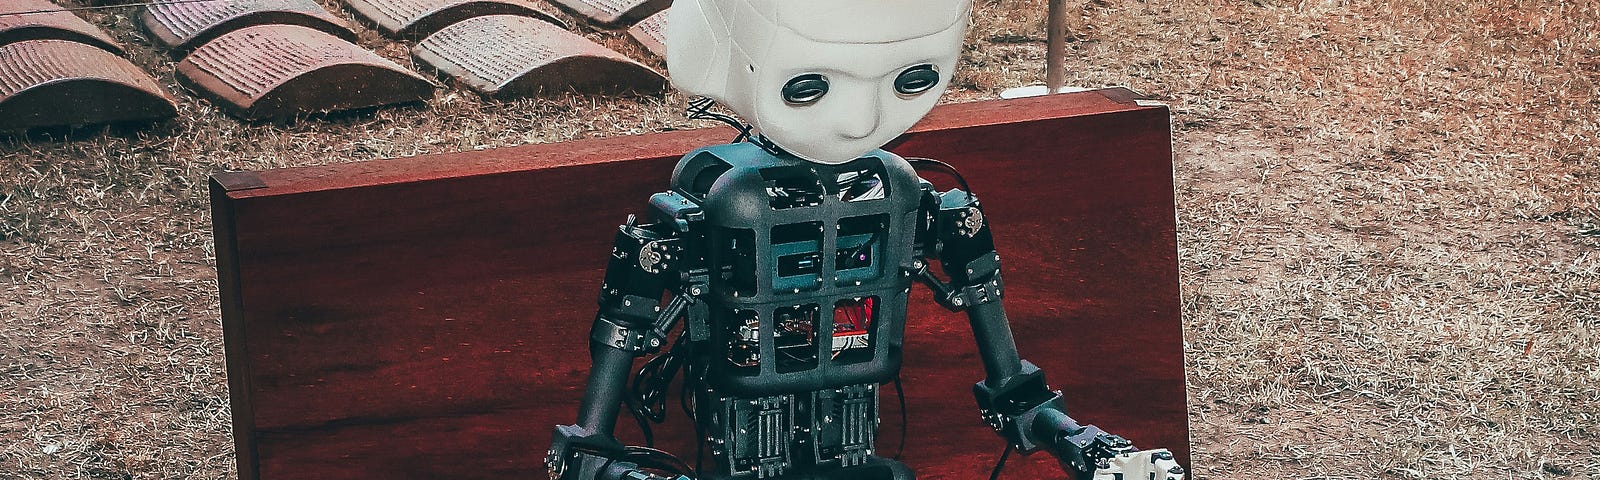 Humanoid robot reading a booklet